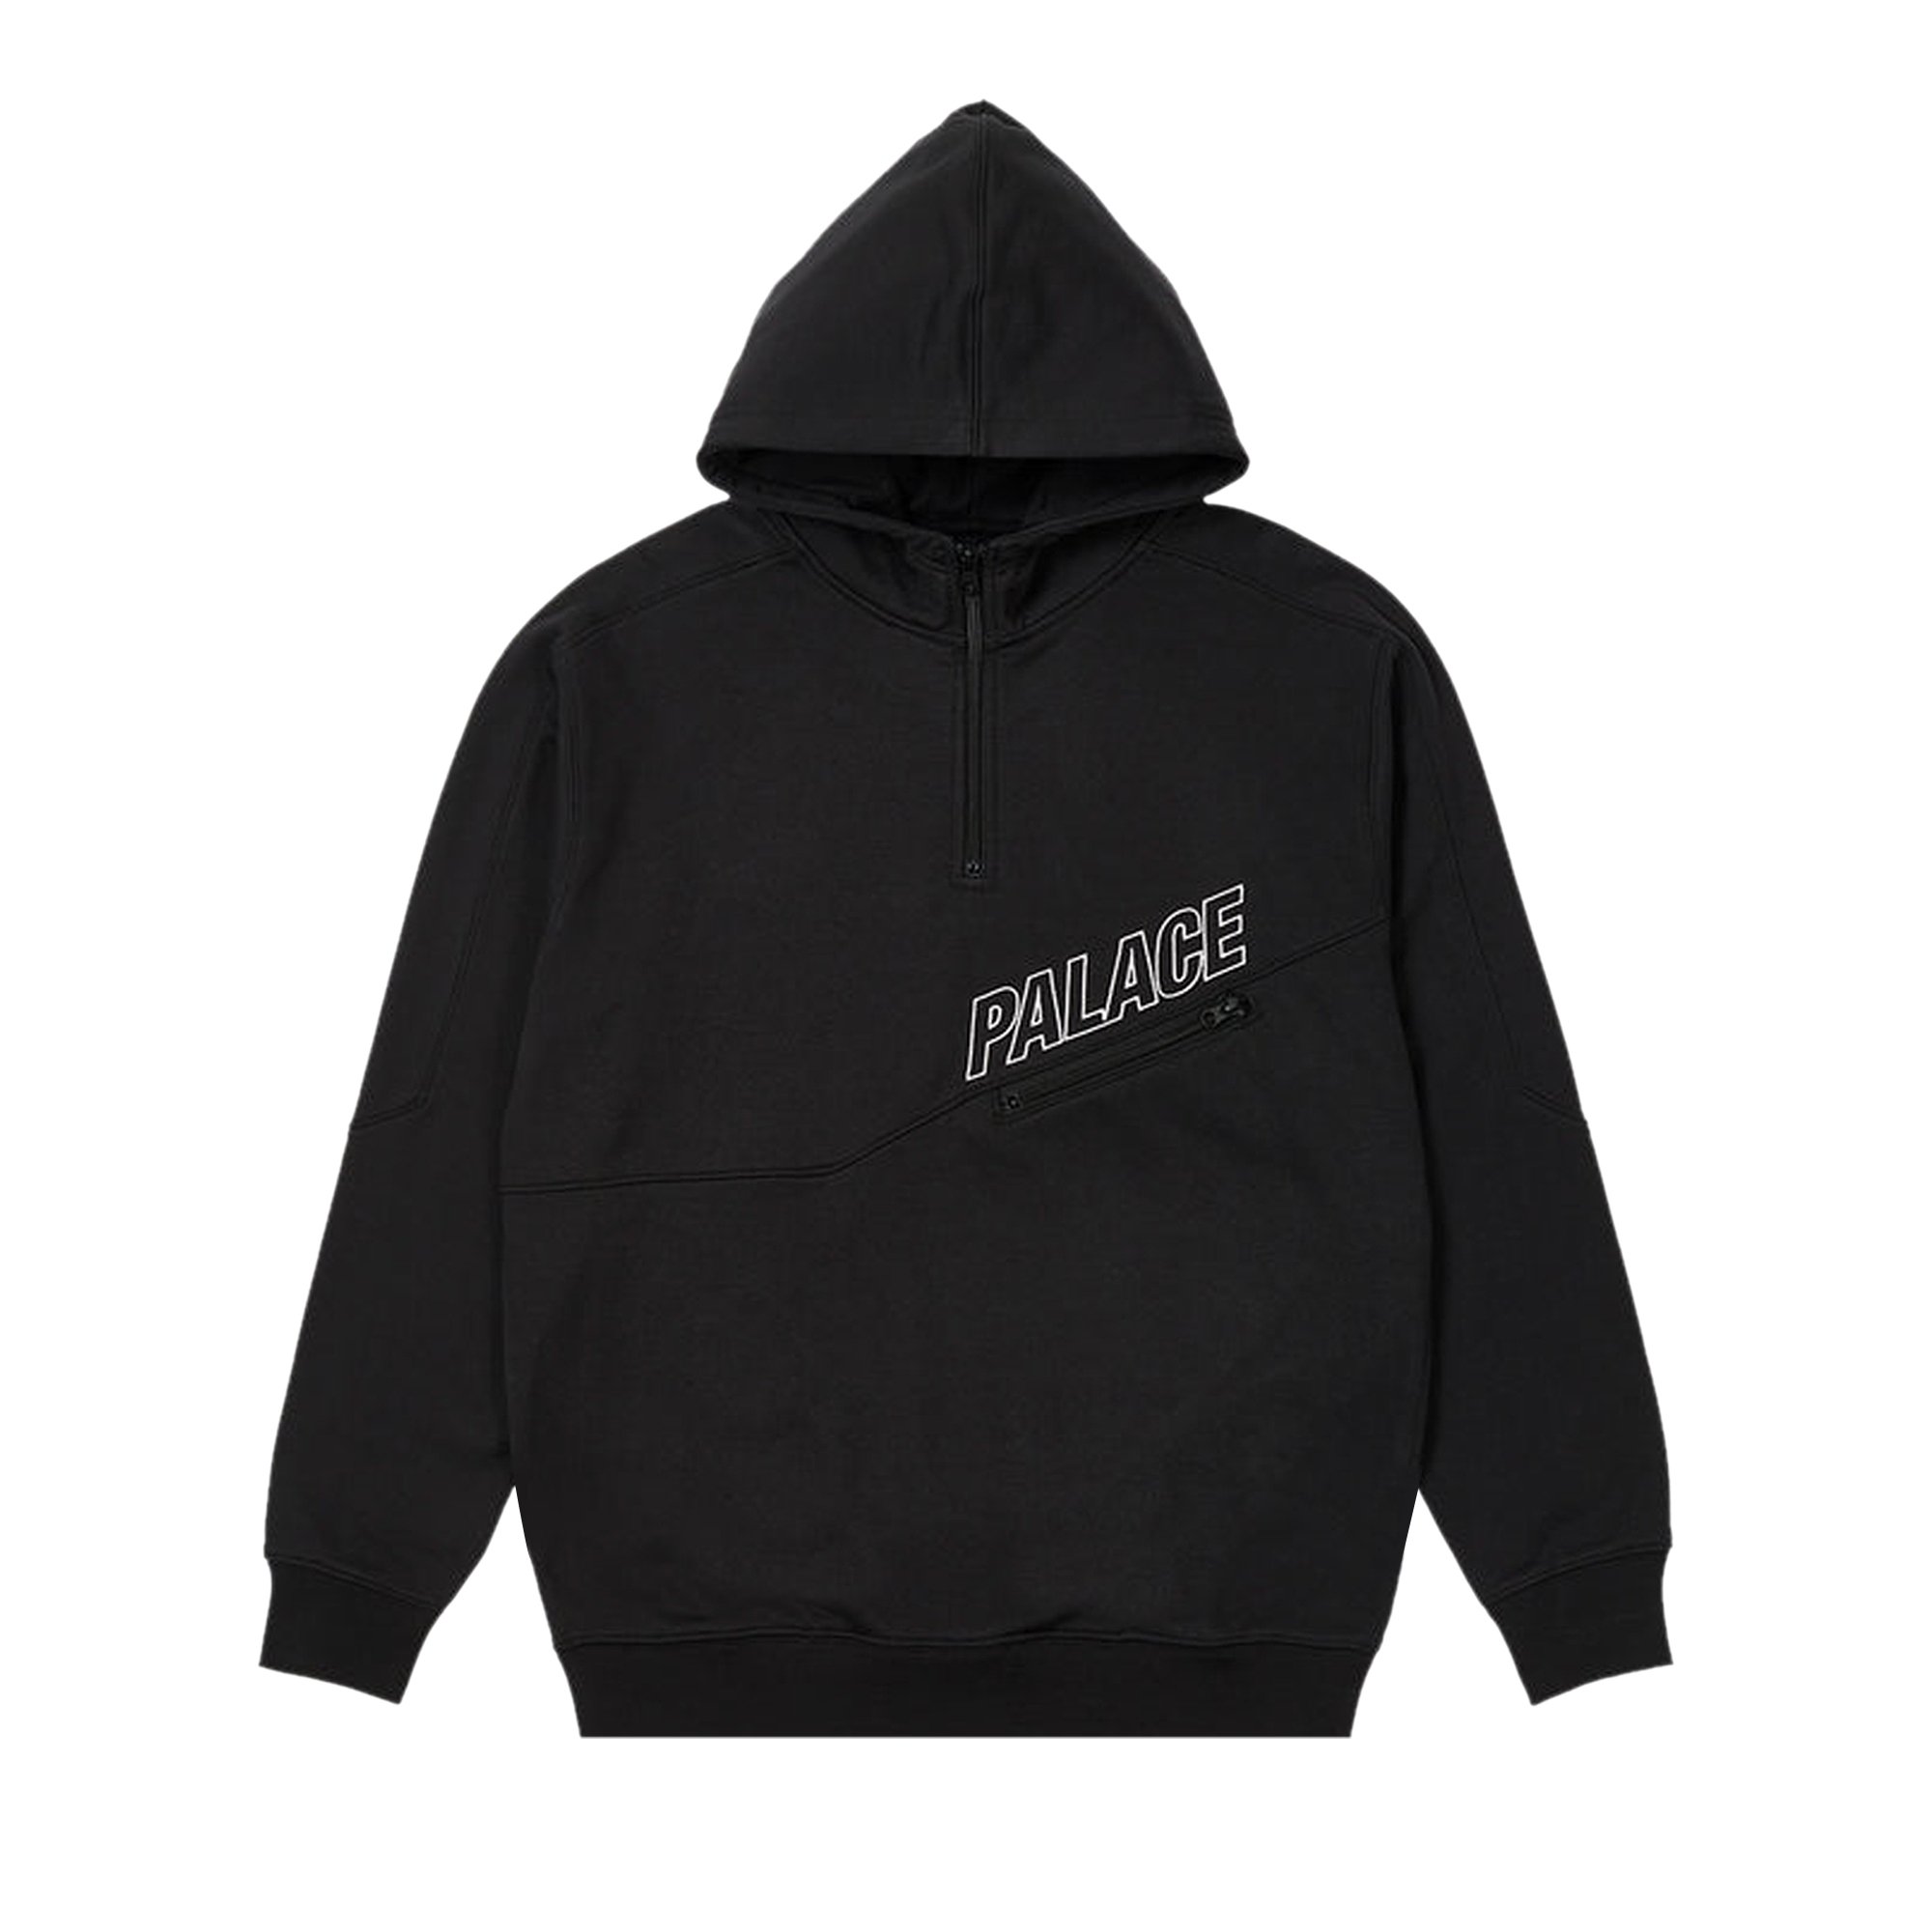 comabPALACE Facemask Thermal Hood Black - トップス